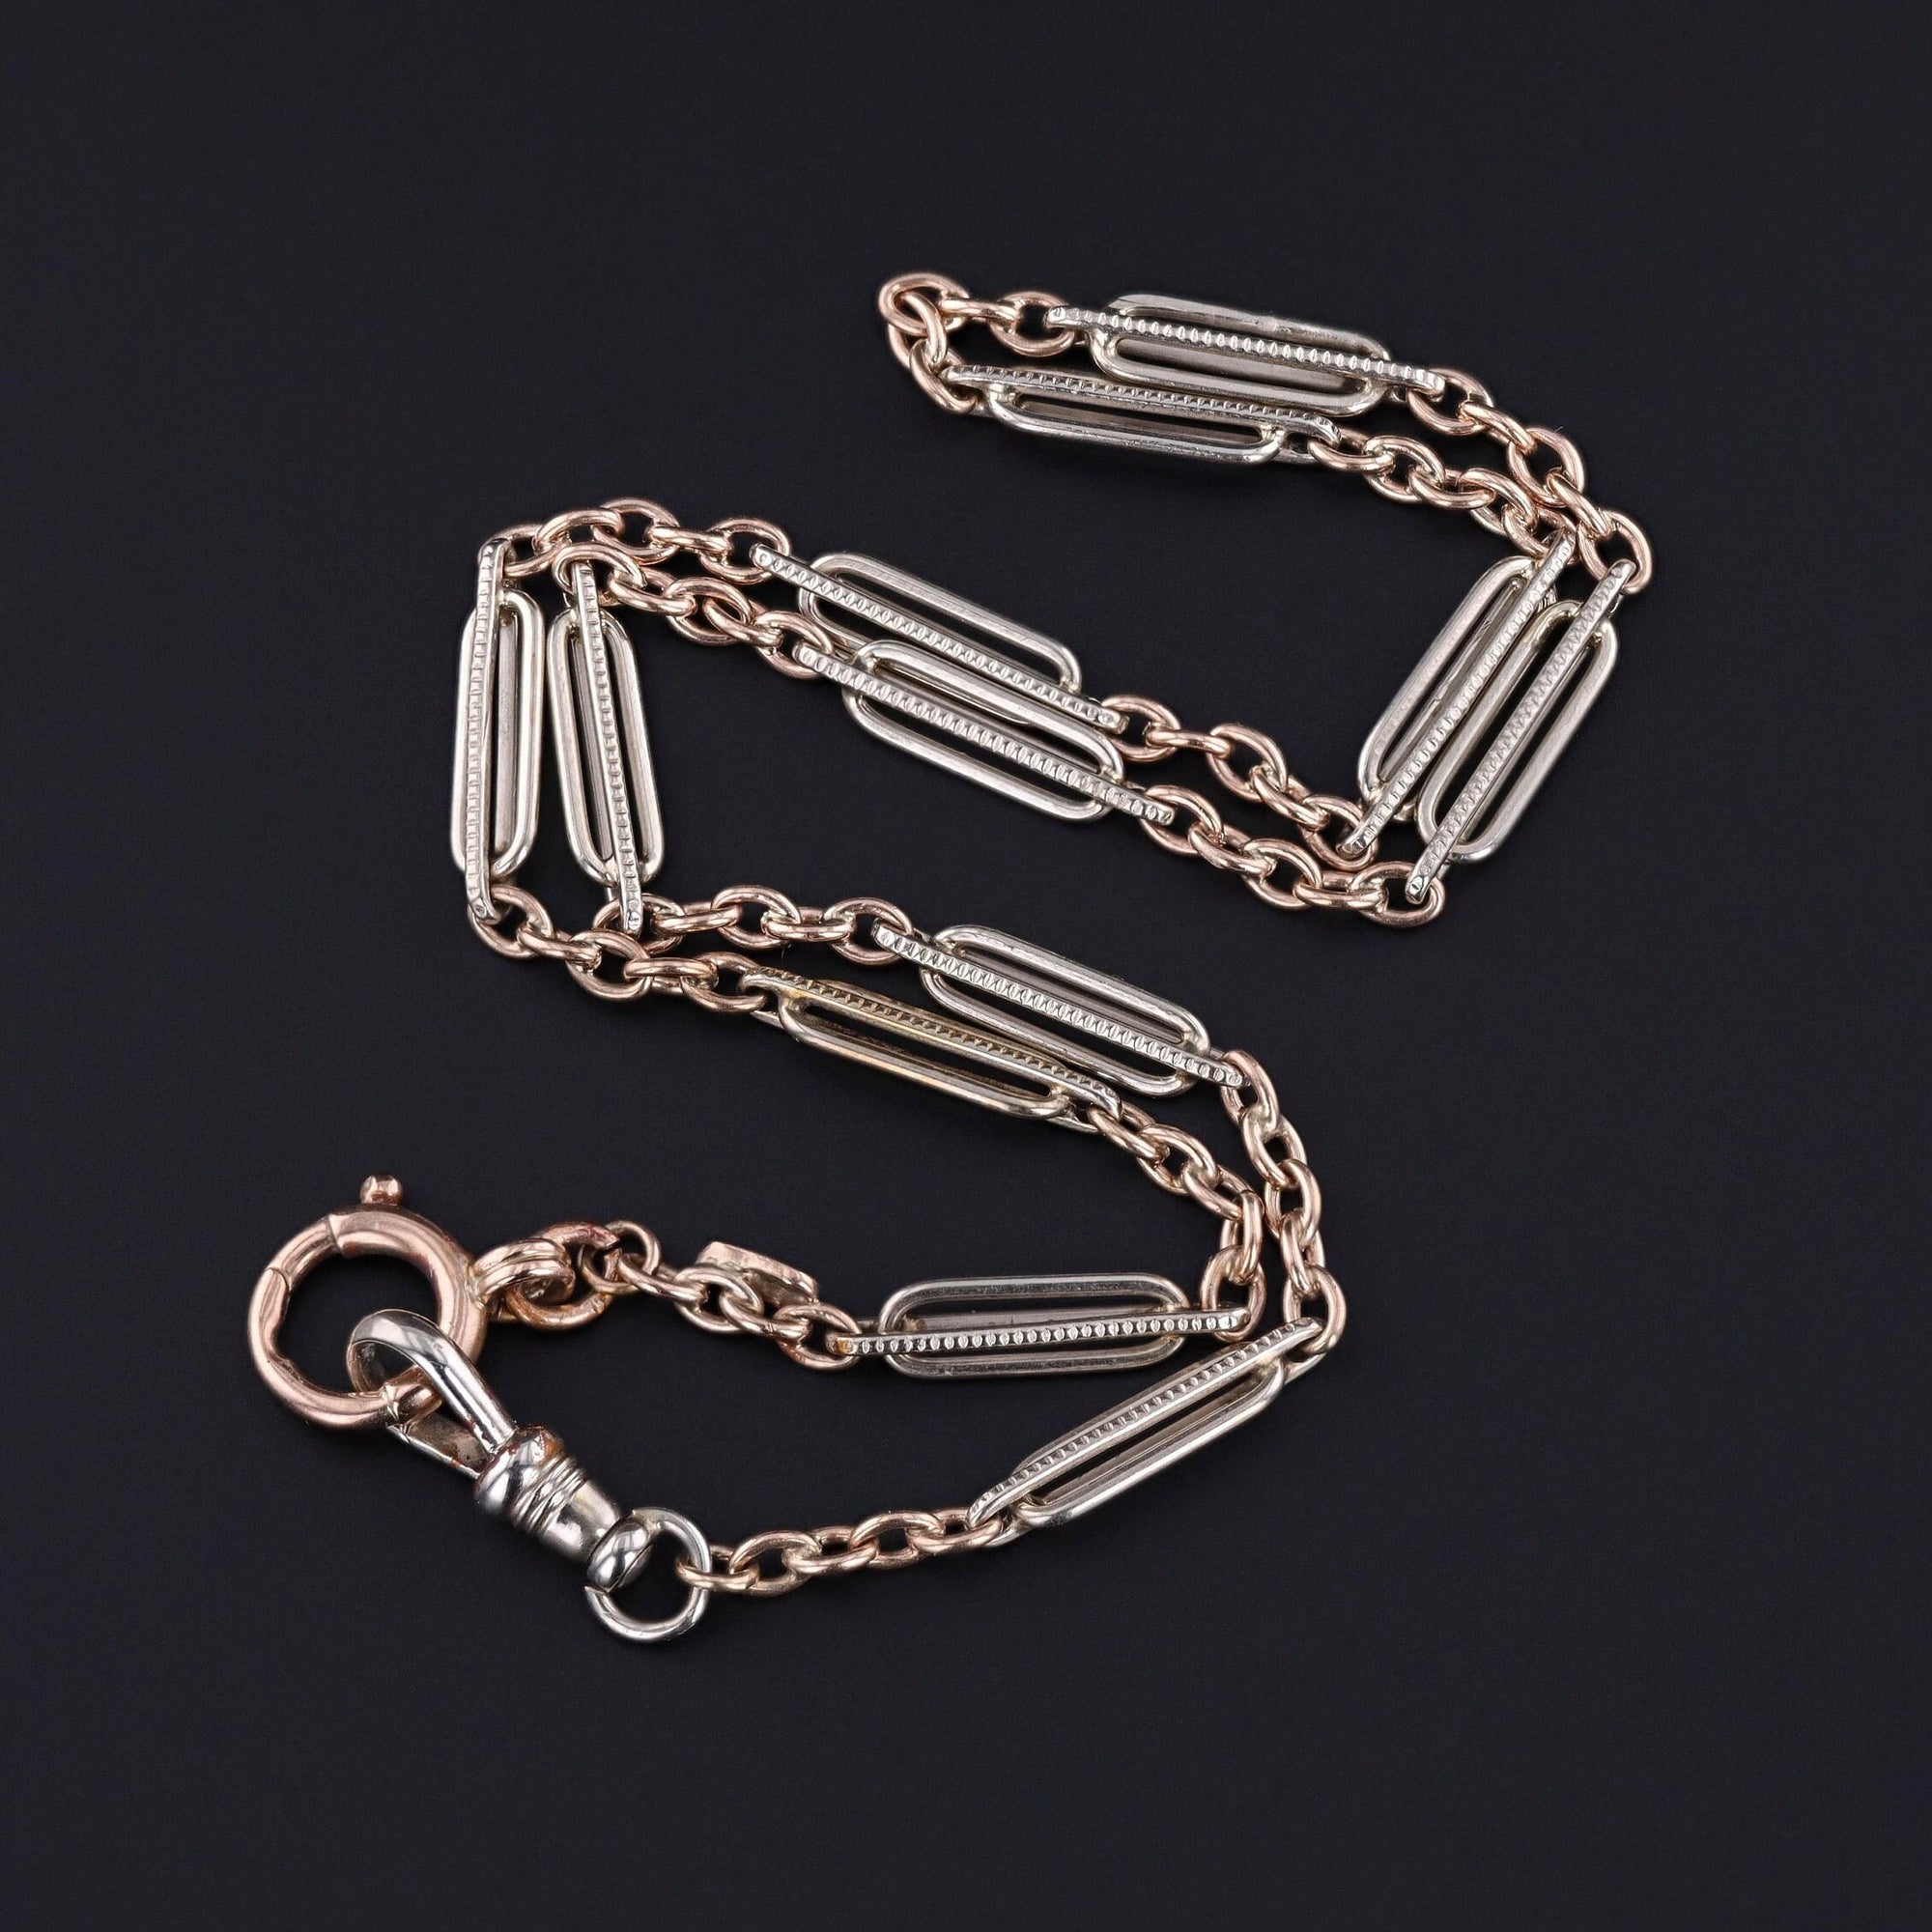 Antique Watch Chain of Rose and White Gold